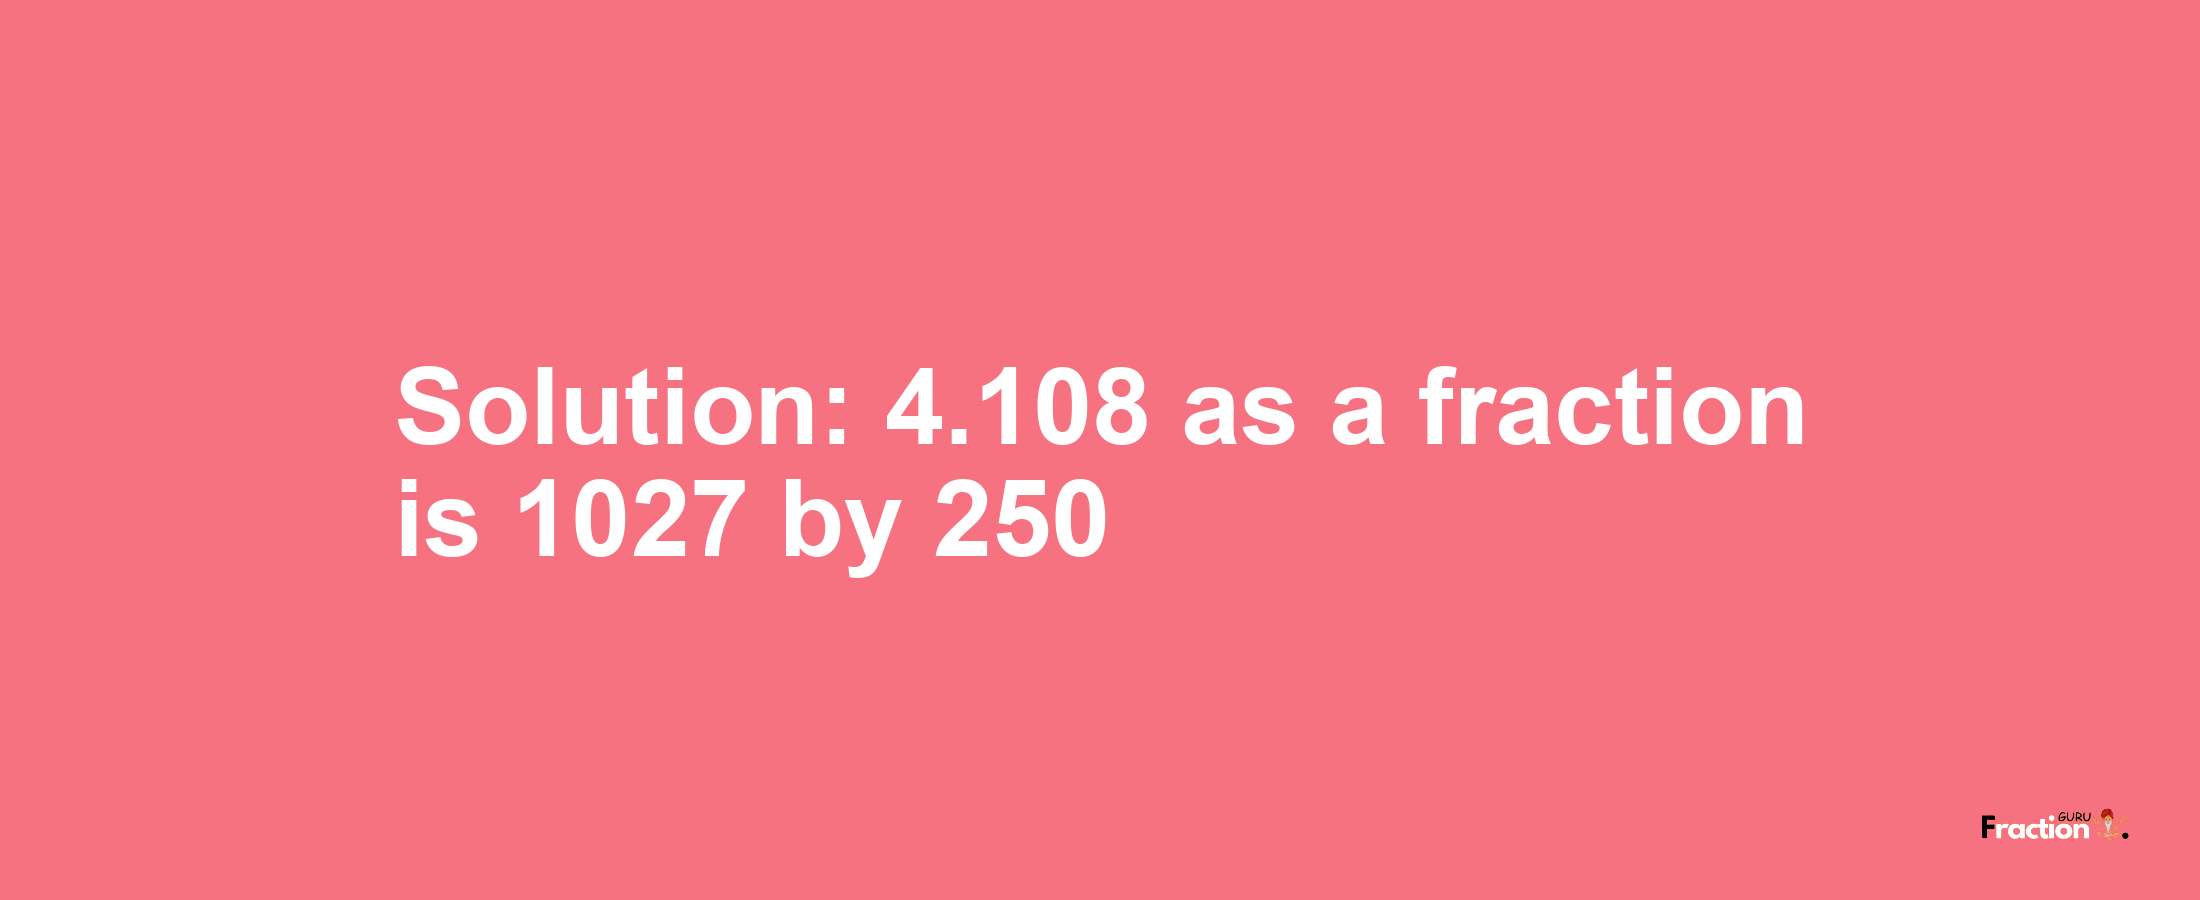 Solution:4.108 as a fraction is 1027/250